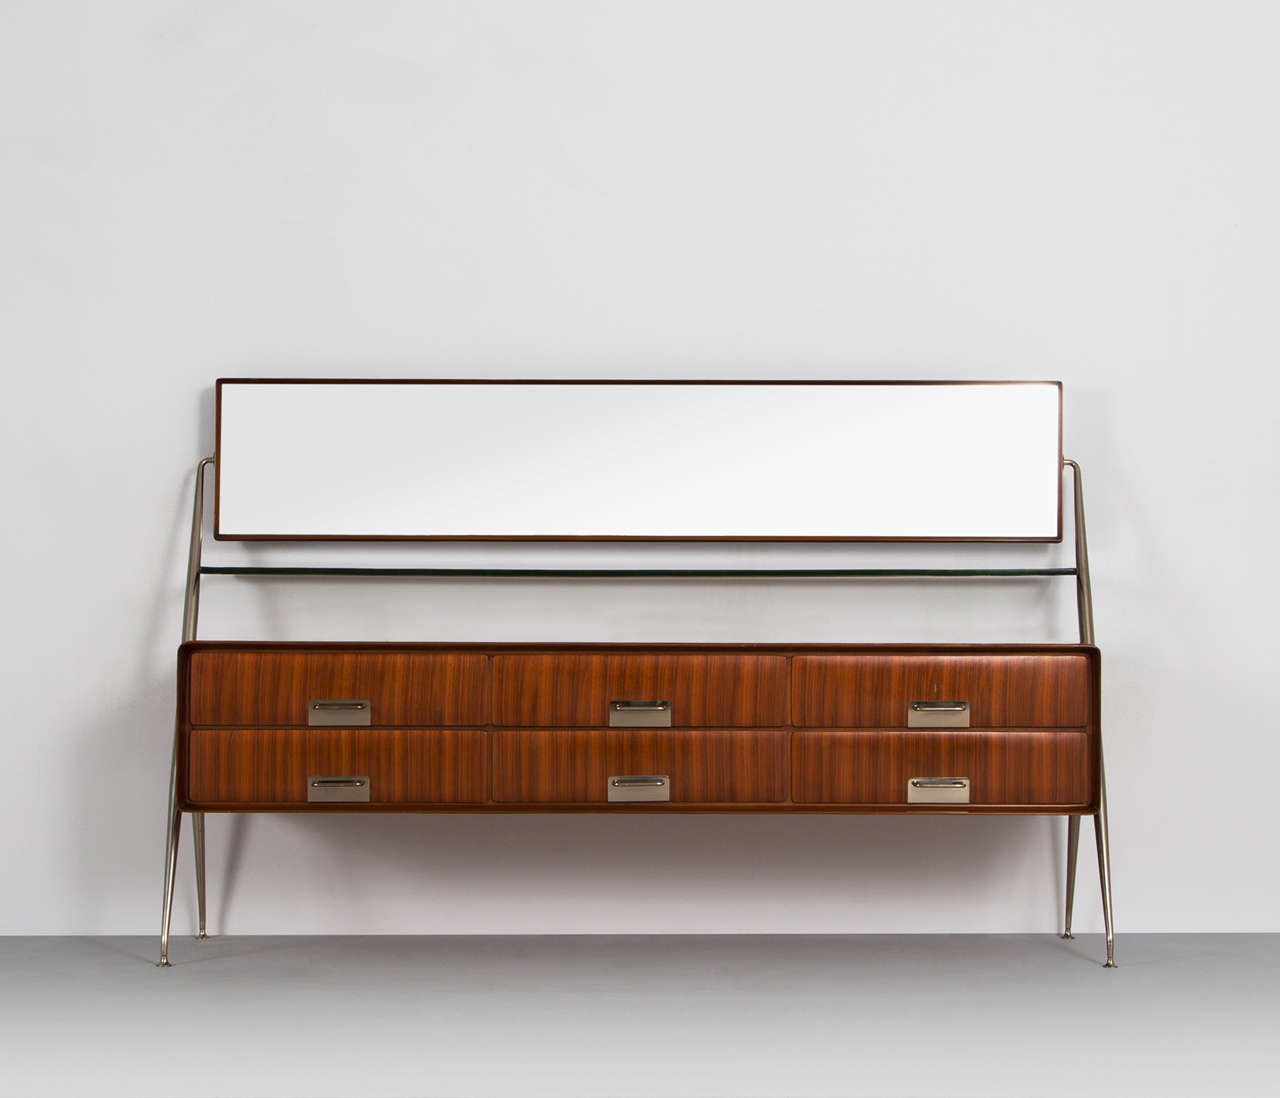 Sideboard, in metal, wood and glass, by Silvio Cavatorta, Italy, 1958.

Elegant and rare Italian sideboard by Silvio Cavatorta equipped with six drawers, glass shelf and pivoting mirror. Tapered angular gilded supports and brass details. A classic